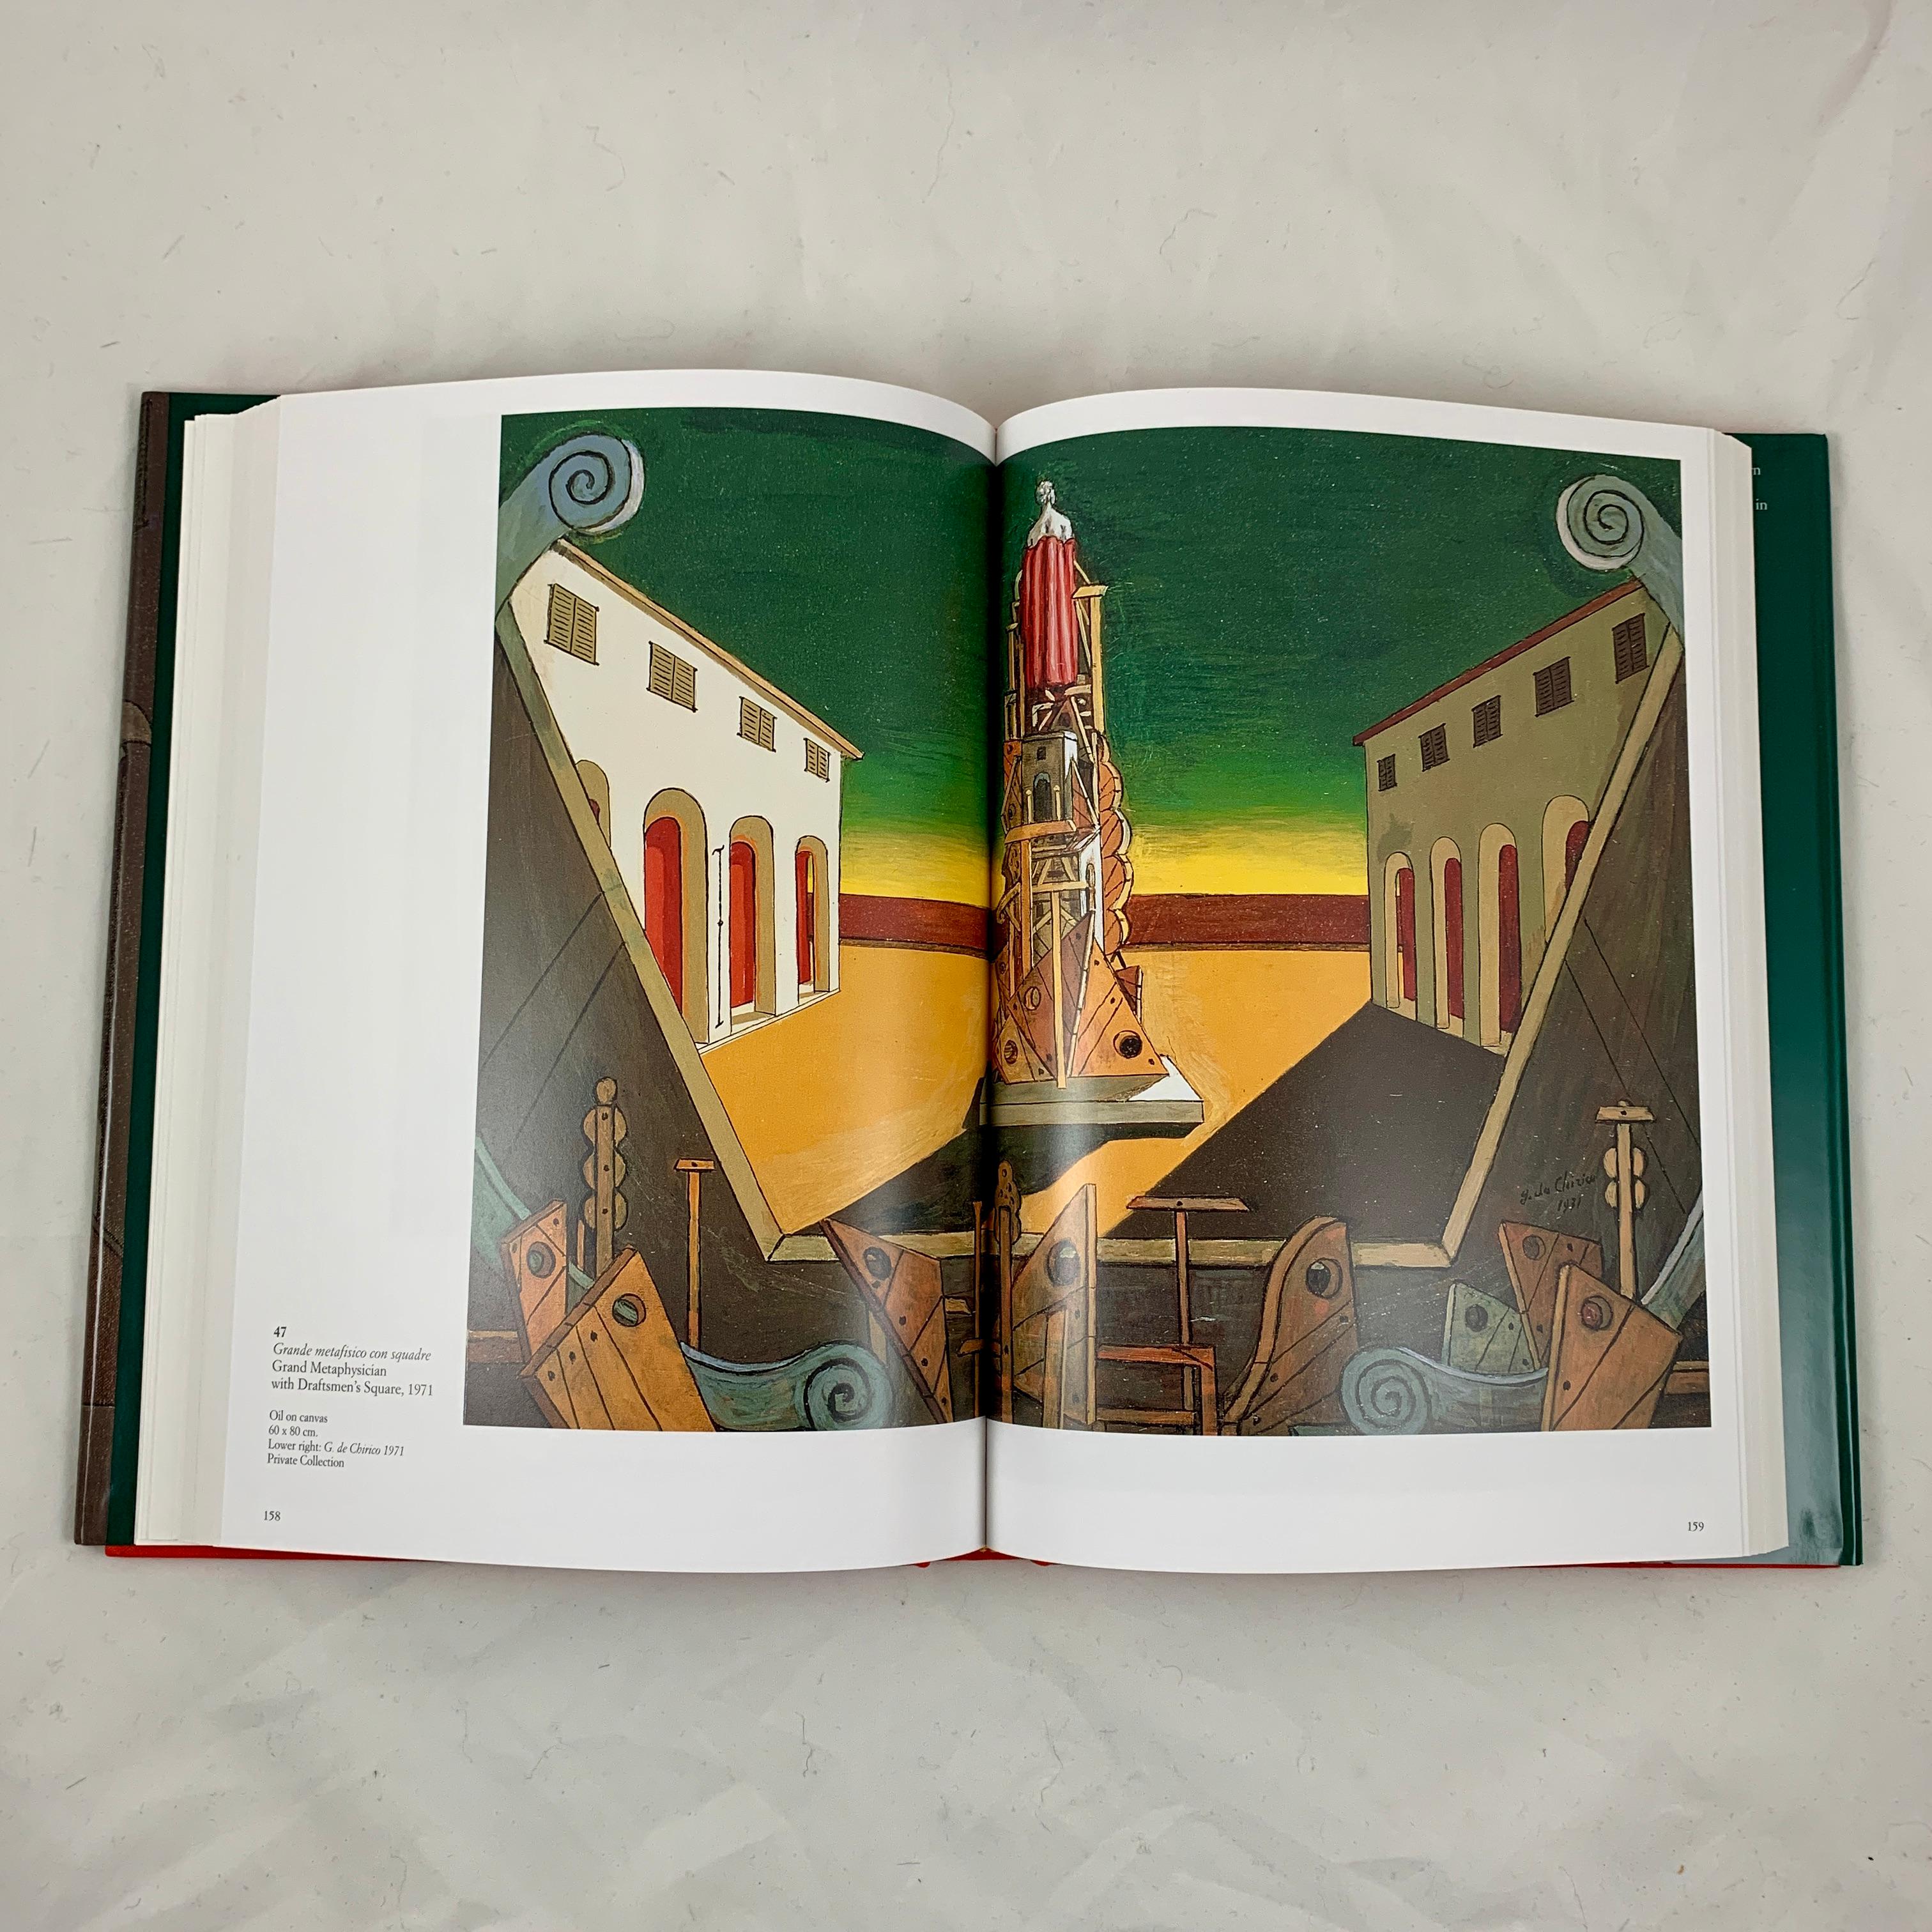 International Style De Chirico and the Mediterranean, Rizzoli Art Books, First Edition